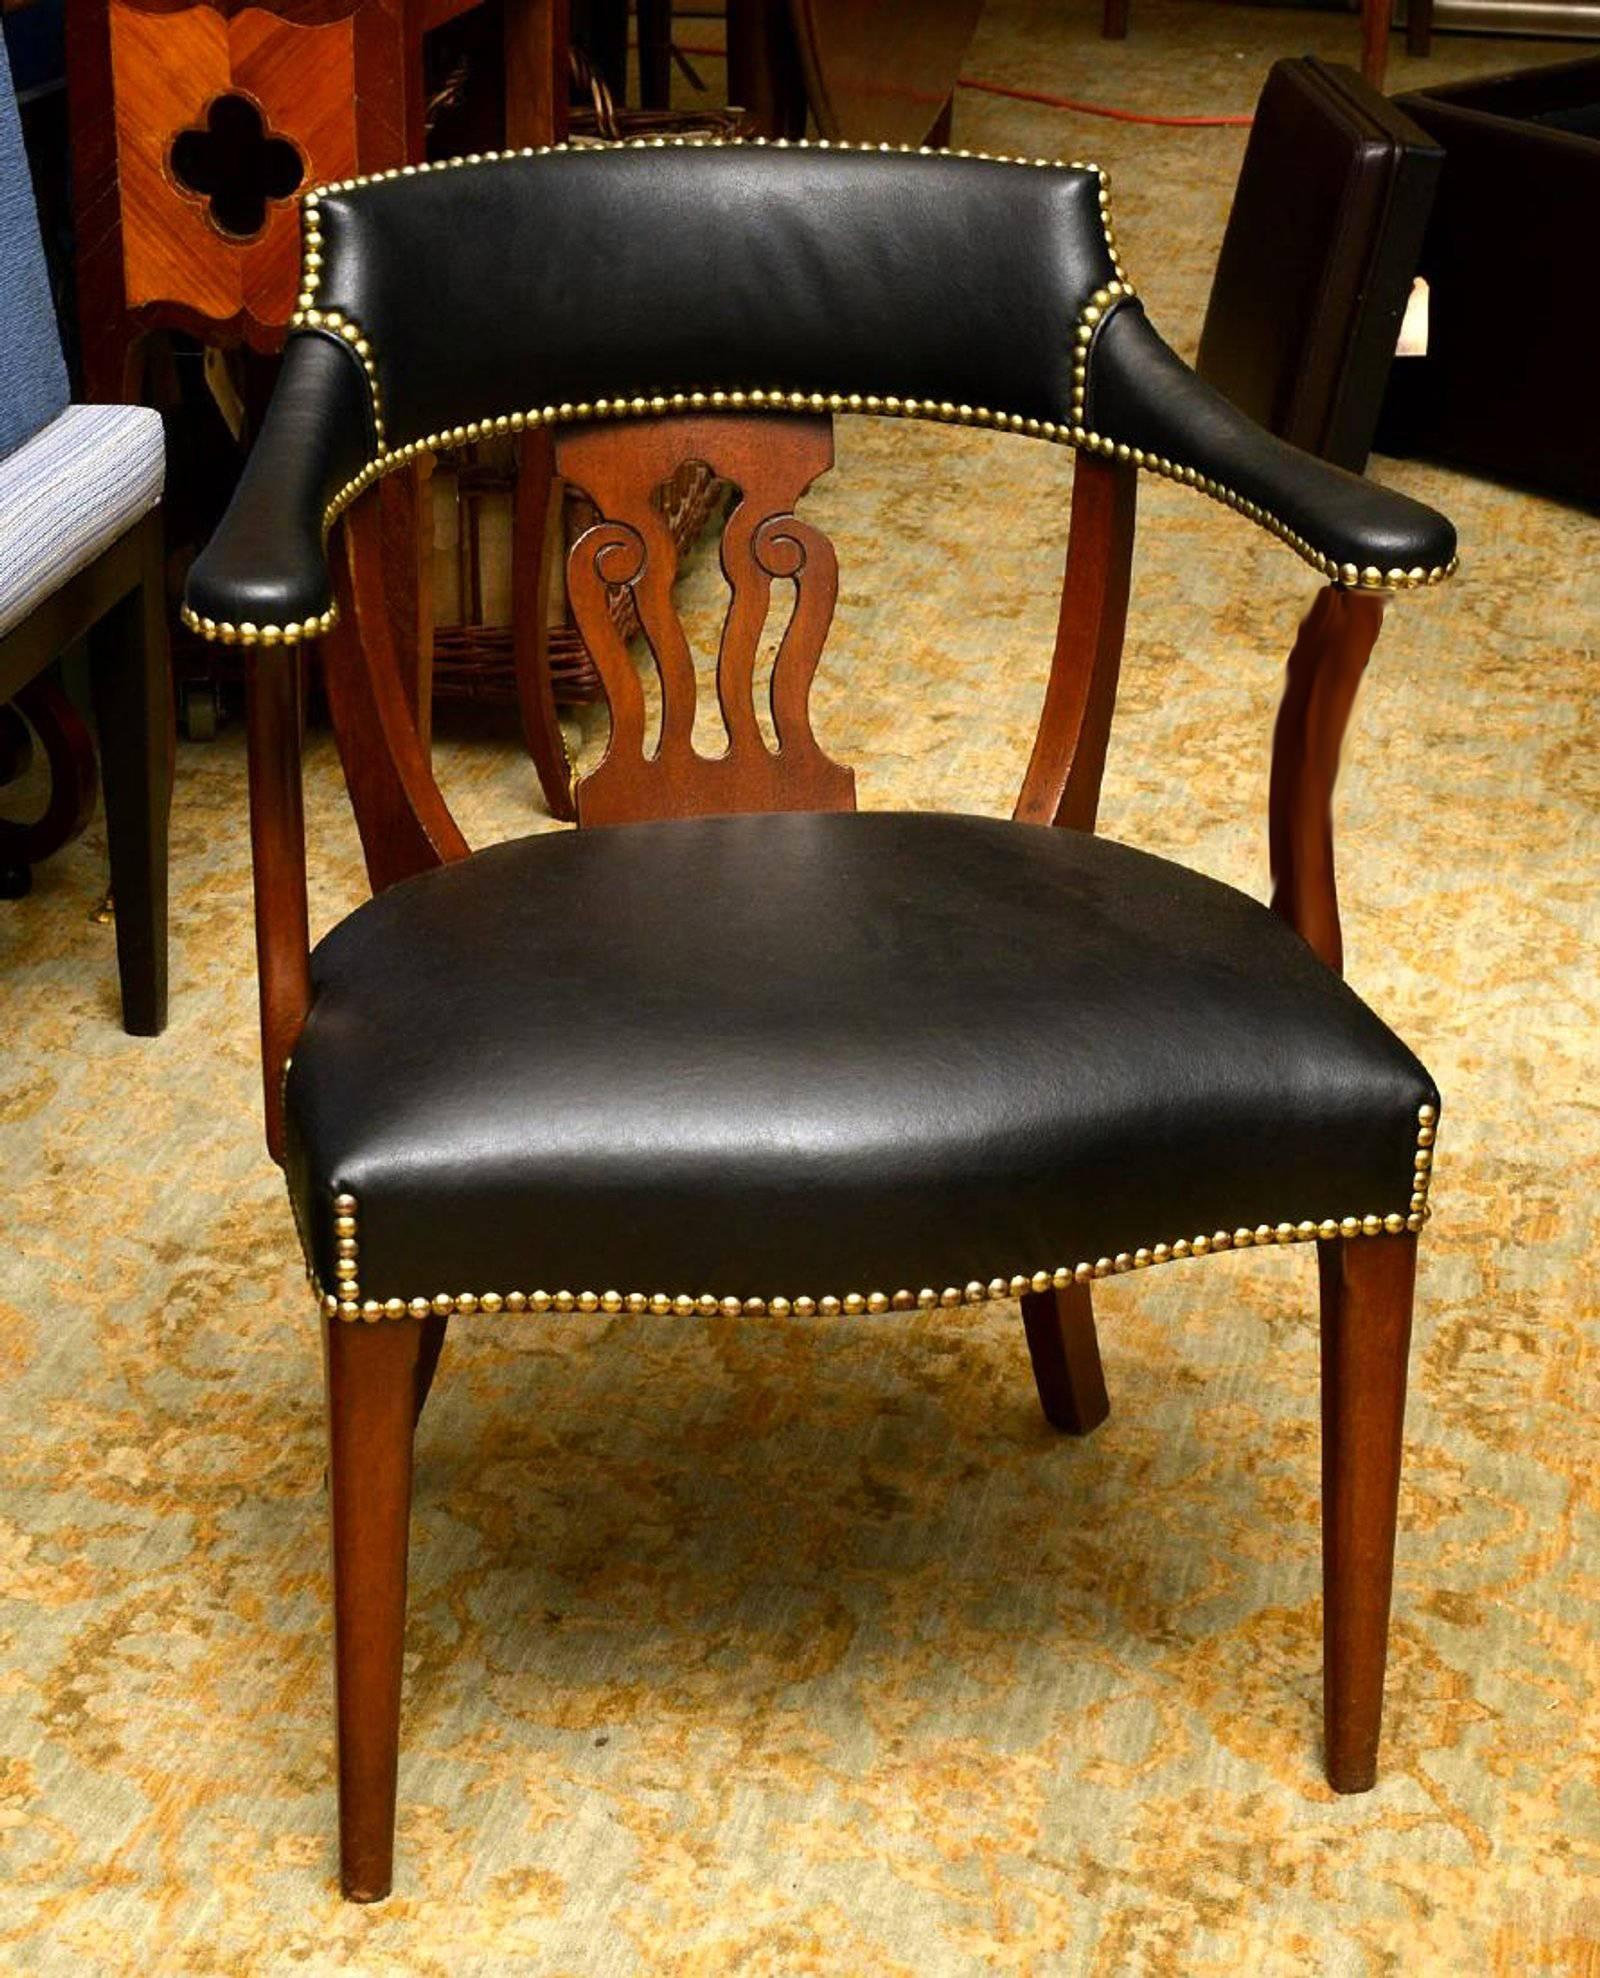 Gorgeous pair of modern English mahogany and leather Captains chairs, each one of typical form with subtle details, custom calfskin leather upholstery.
Provenance: Acquired from Jacques Grange.